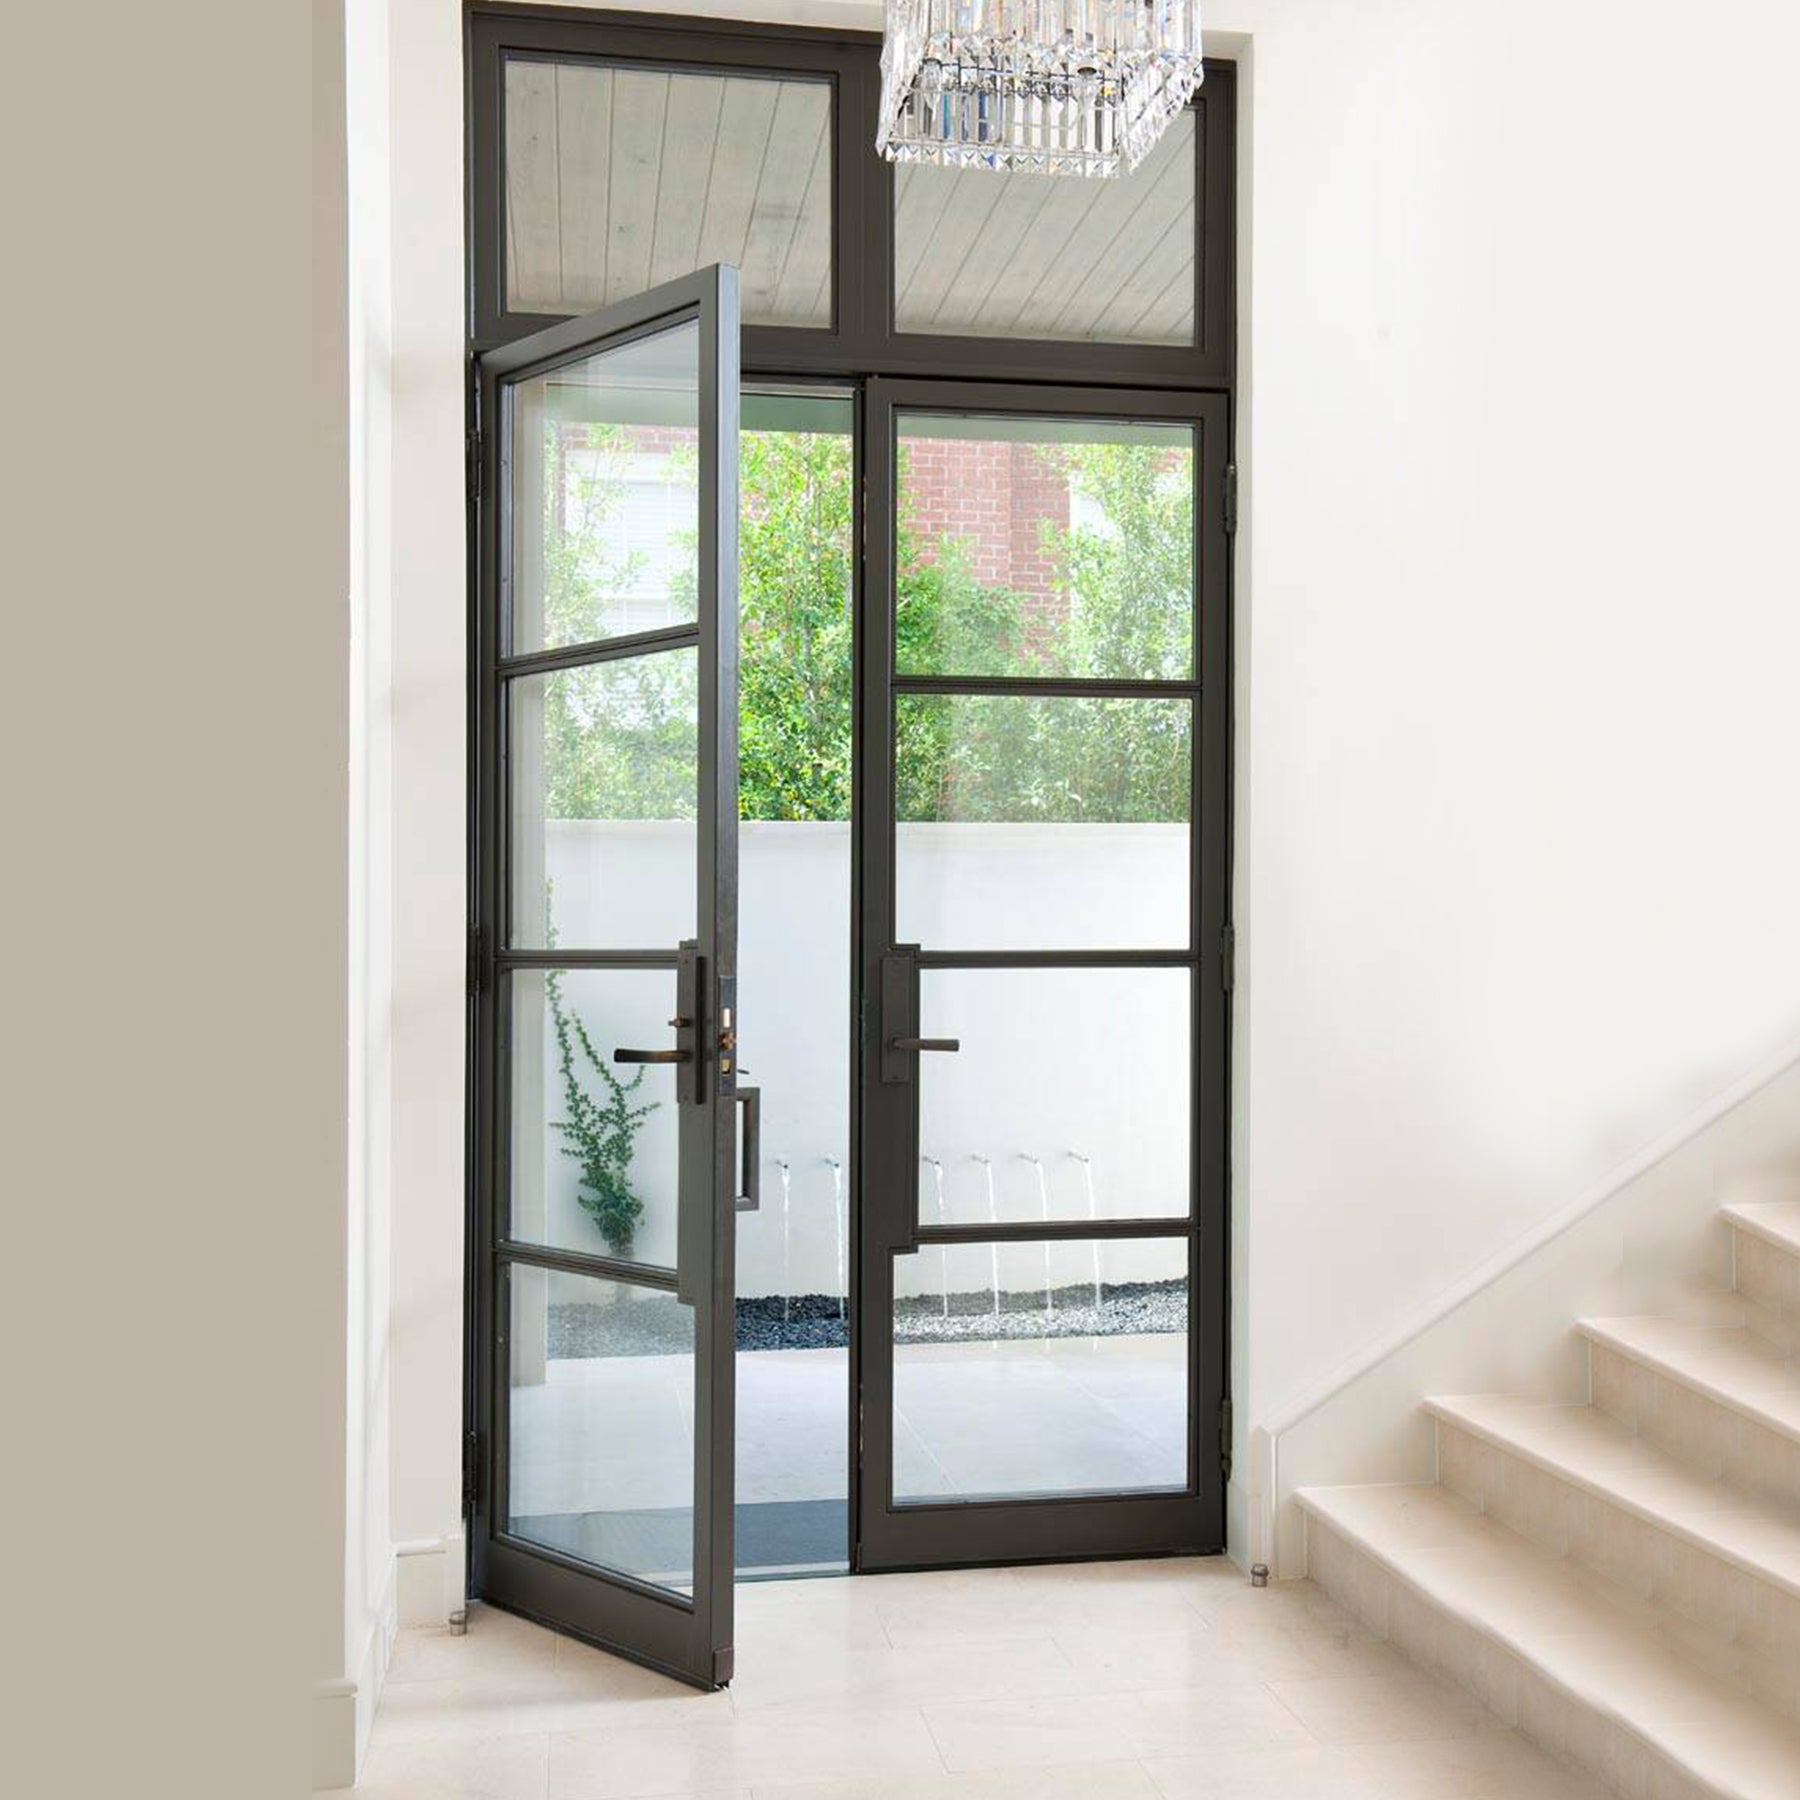 gloryirondoors insulated exquisite double front iron glass doors in small size